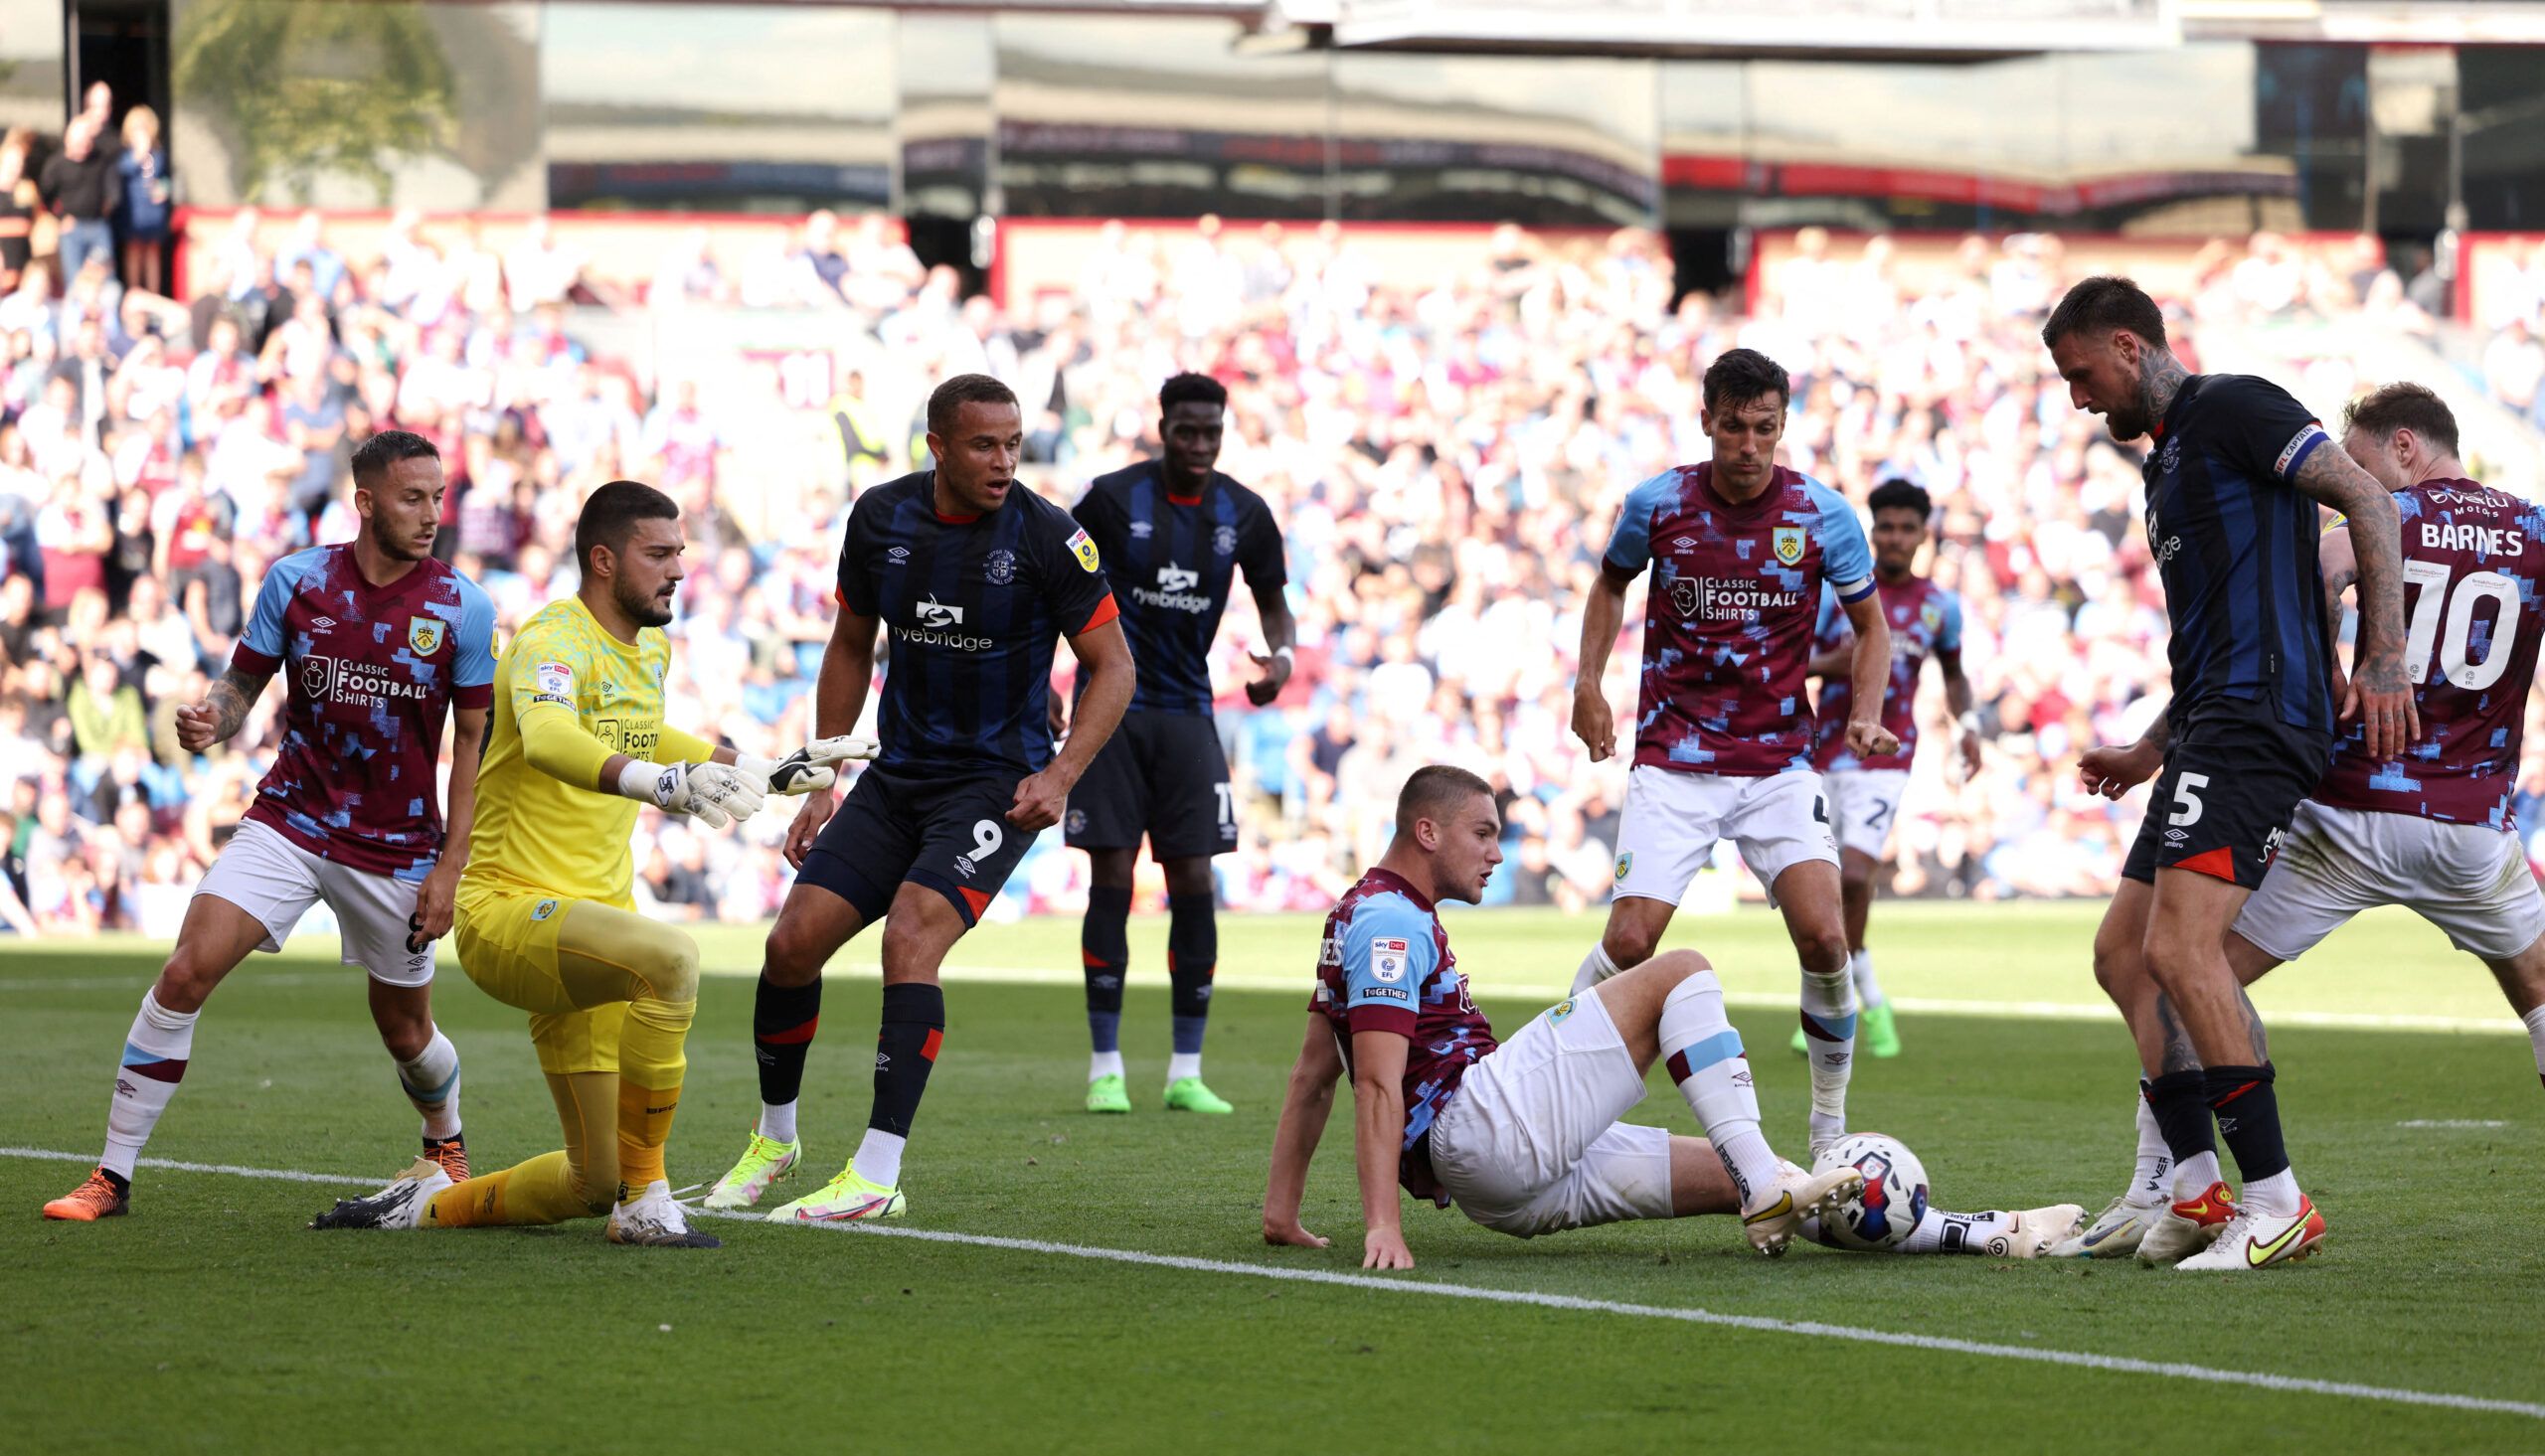 Soccer Football - Championship - Burnley v Luton Town - Turf Moor, Burnley, Britain - August 6, 2022  Burnley's Taylor Harwood-Bellis in action with Luton Town's Sonny Bradley  Action Images/John Clifton  EDITORIAL USE ONLY. No use with unauthorized audio, video, data, fixture lists, club/league logos or 